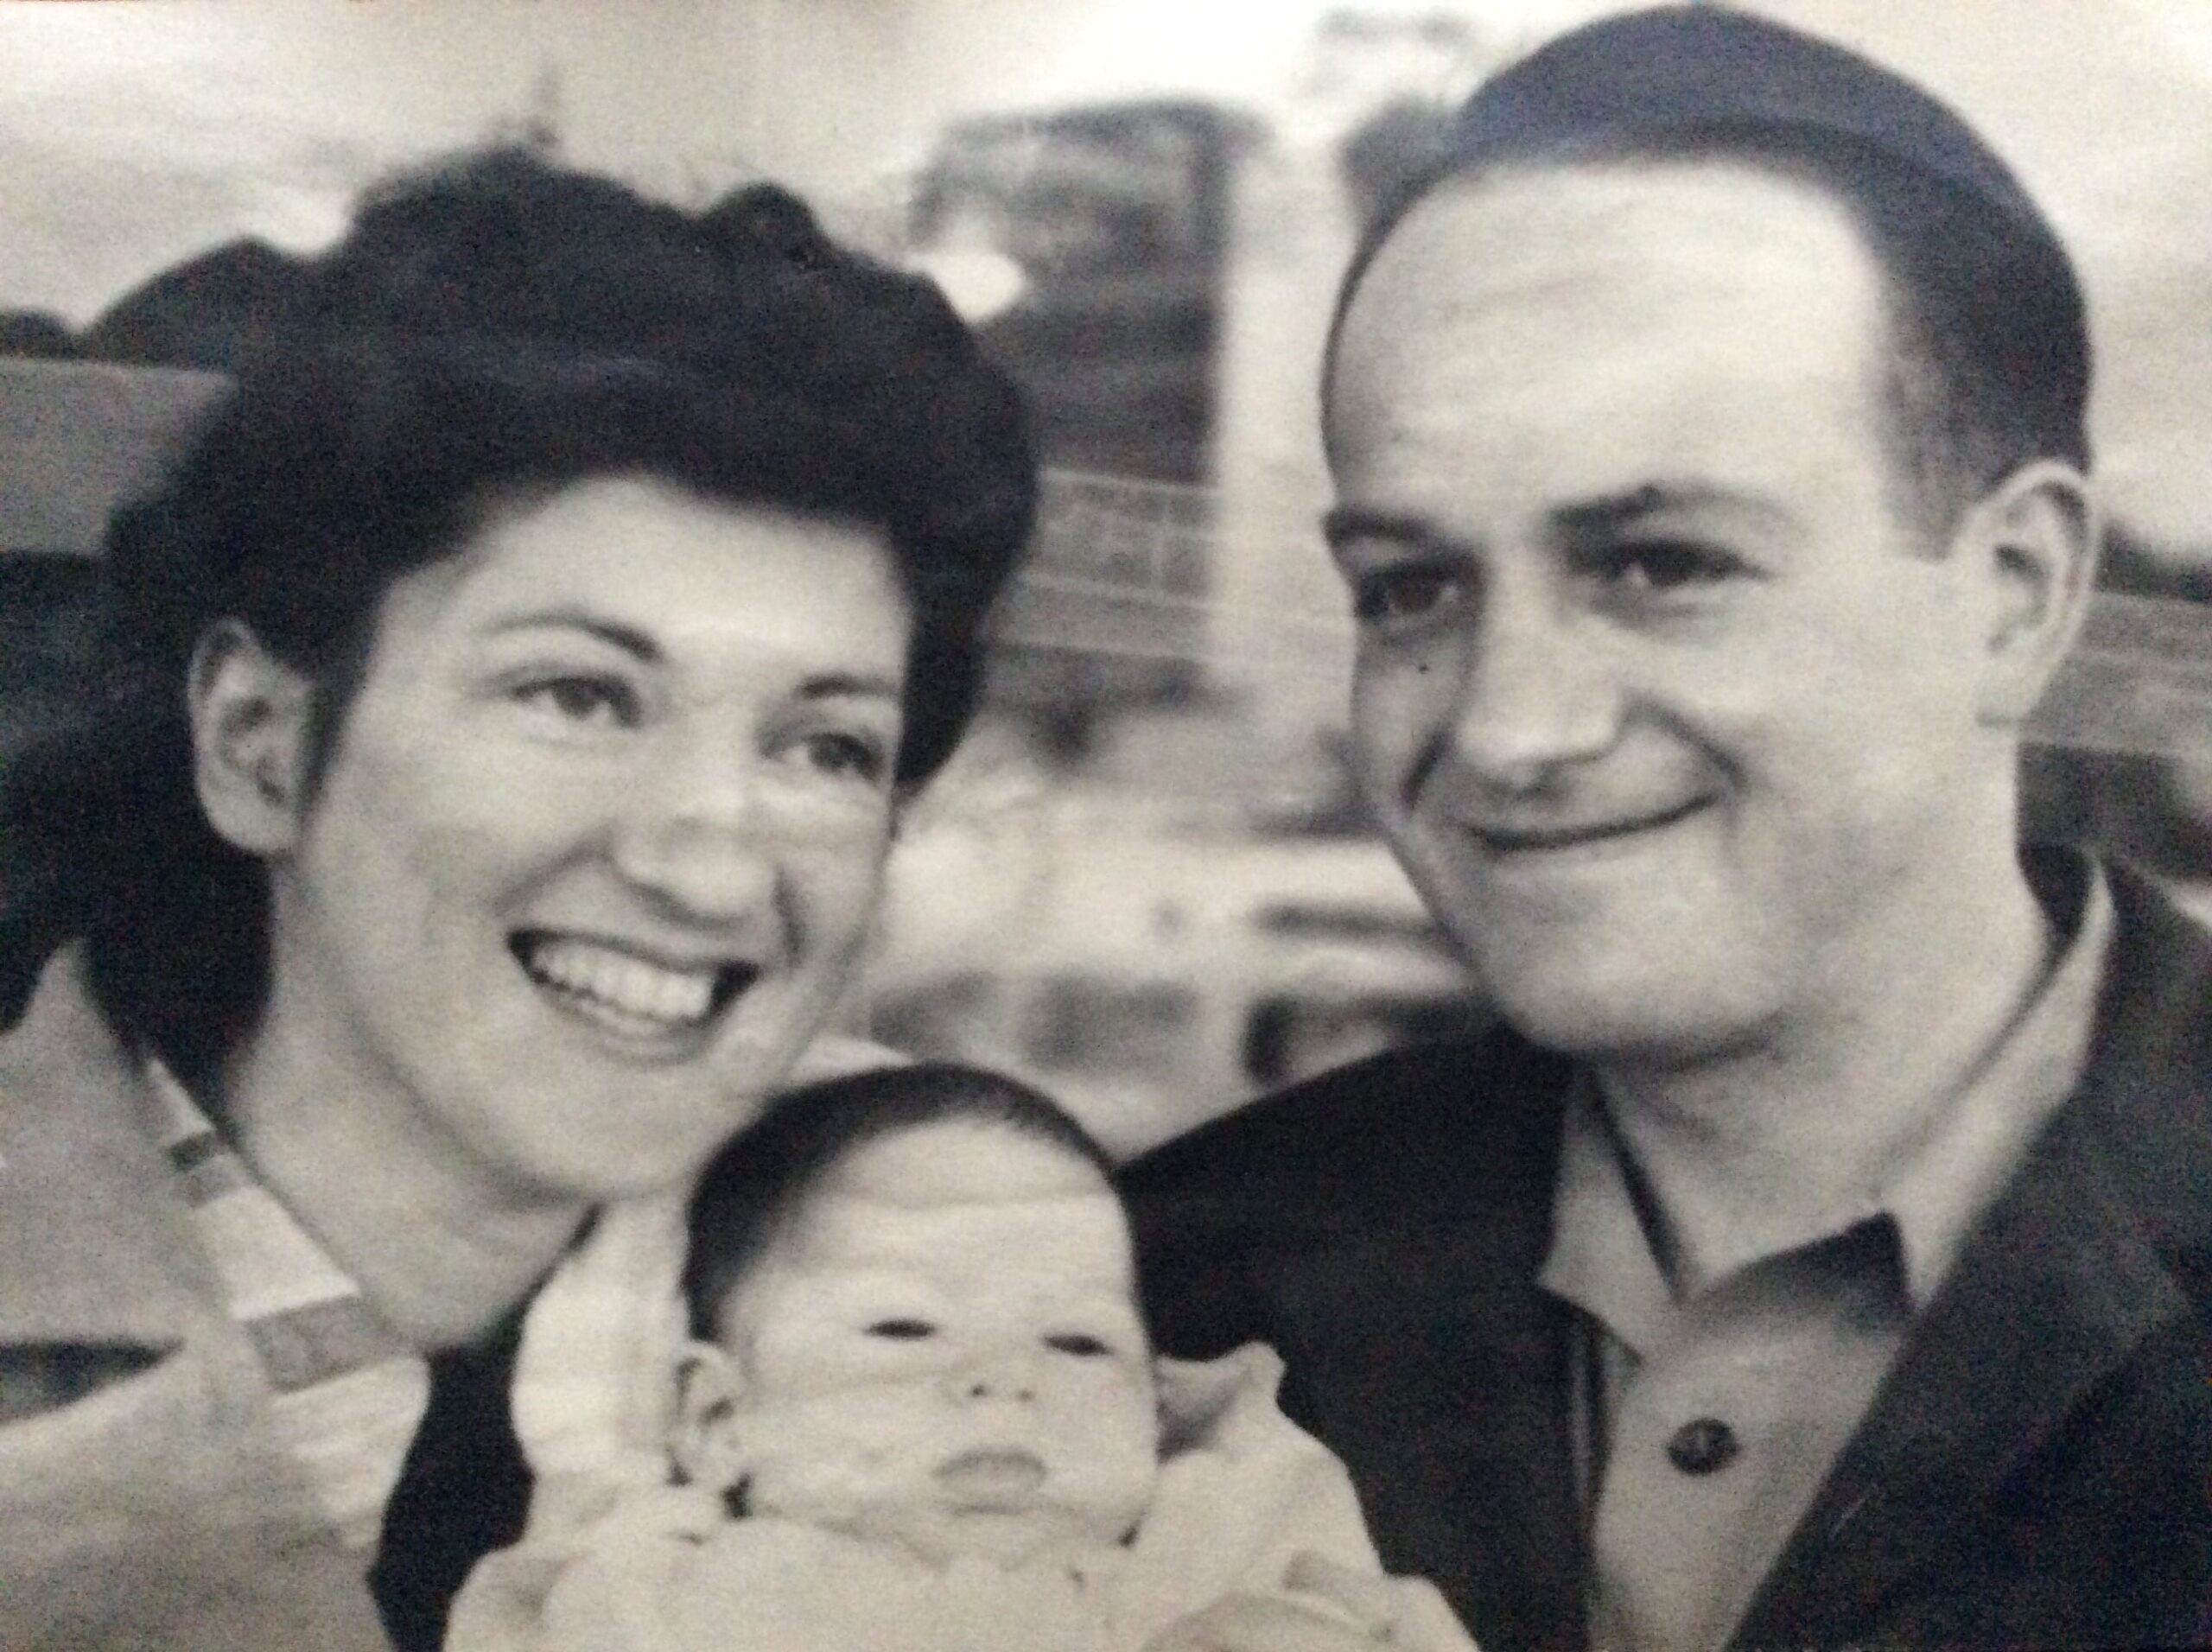 A smiling Dr. Morris Collen and his wife holding their newborn child.